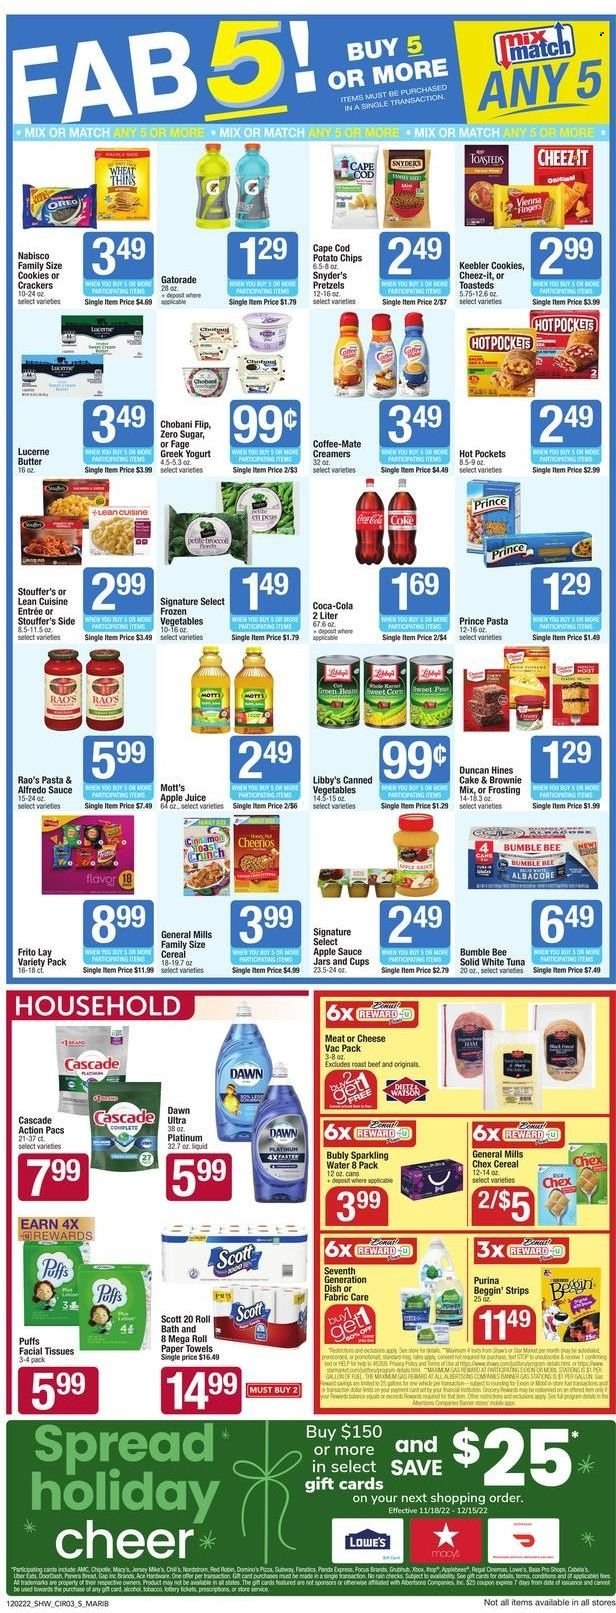 thumbnail - Shaw’s Flyer - 12/02/2022 - 12/08/2022 - Sales products - pretzels, cake, Ace, puffs, brownie mix, corn, green beans, peas, sweet corn, Mott's, cod, tuna, hot pocket, pizza, pasta, Bumble Bee, sauce, Lean Cuisine, Alfredo sauce, ham, greek yoghurt, Oreo, yoghurt, Chobani, Coffee-Mate, butter, strips, Stouffer's, cookies, vienna fingers, crackers, 7 Days, Keebler, potato chips, Thins, Cheez-It, frosting, canned vegetables, cereals, Cheerios, cinnamon, apple sauce, apple juice, Coca-Cola, juice, Gatorade, sparkling water, L'Or, beef meat, roast beef, Scott, tissues, kitchen towels, paper towels, Cascade, Fab, facial tissues, cup, jar, Purina, Beggin'. Page 3.